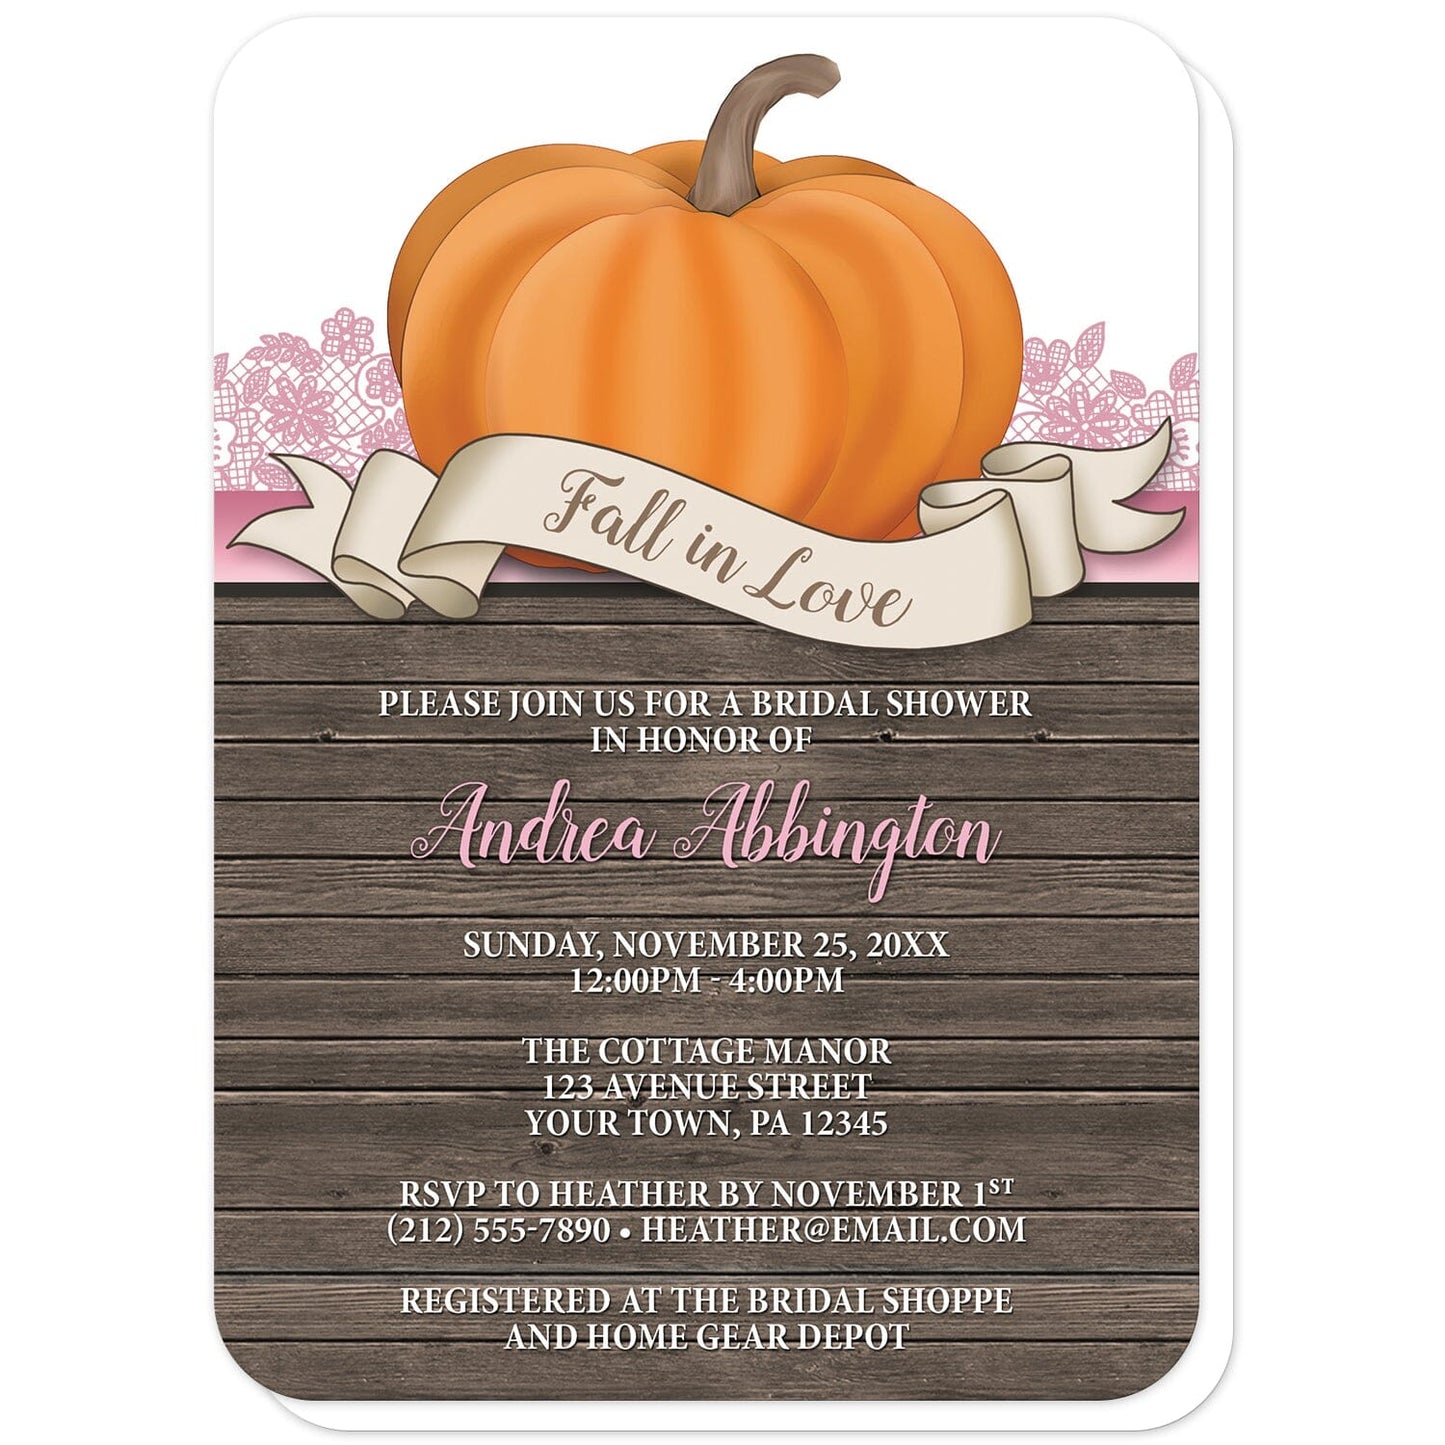 Rustic Orange Pink Pumpkin Fall in Love Bridal Shower Invitations (with rounded corners) at Artistically Invited. Invites with an illustration of a large orange pumpkin over wood and a beige ribbon banner that reads: "Fall in Love". This unique orange pumpkin drawing is set on a horizontal pink stripe with pink lace behind it. The personalized bridal shower celebration details you provide will be custom printed in pink and white over a rustic wood background illustration below the pumpkin.